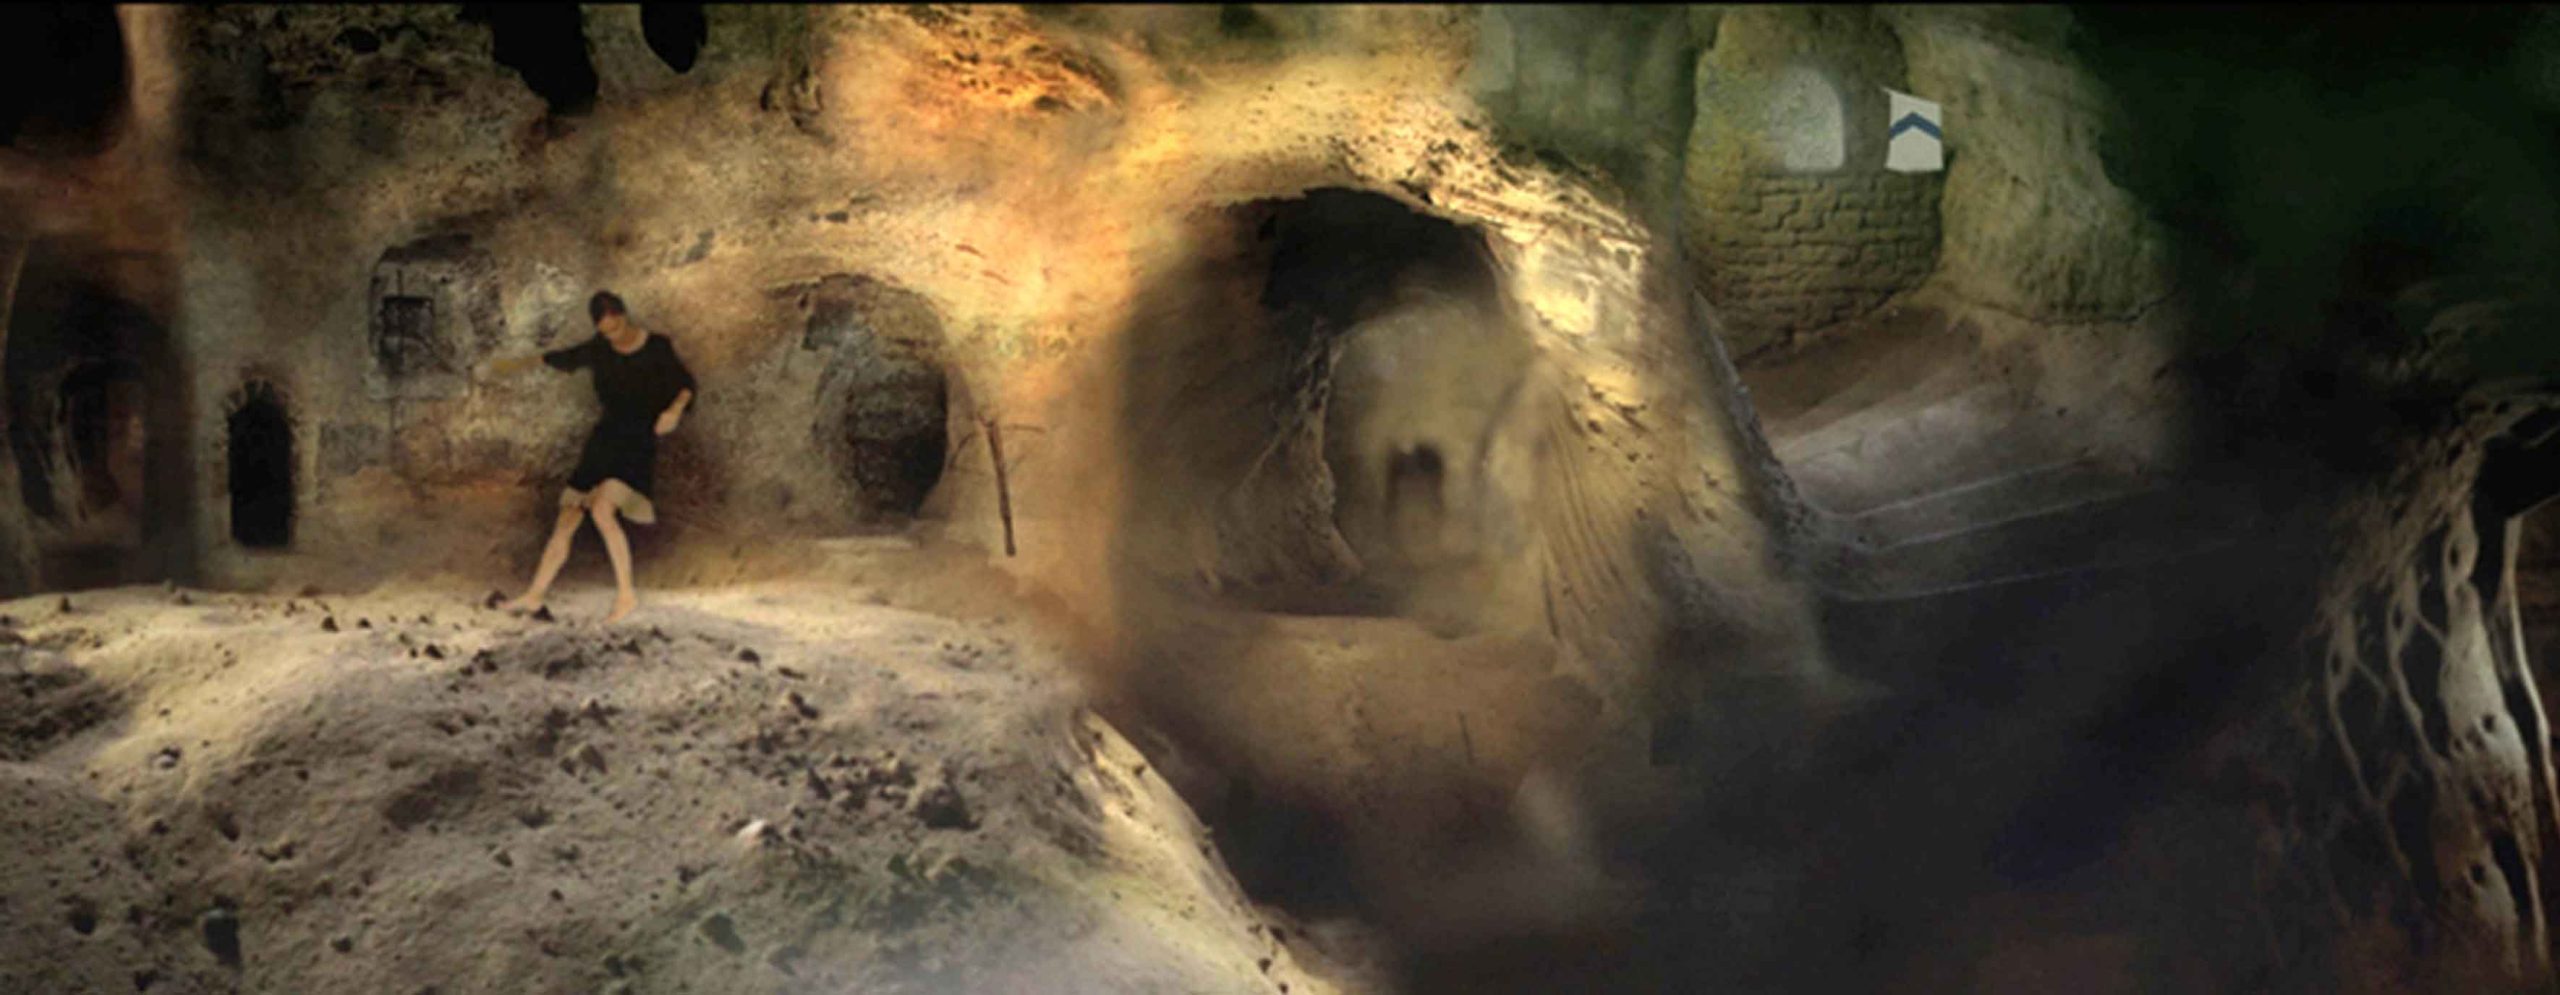 CITY OF CAVES (2012), 06’ 45”